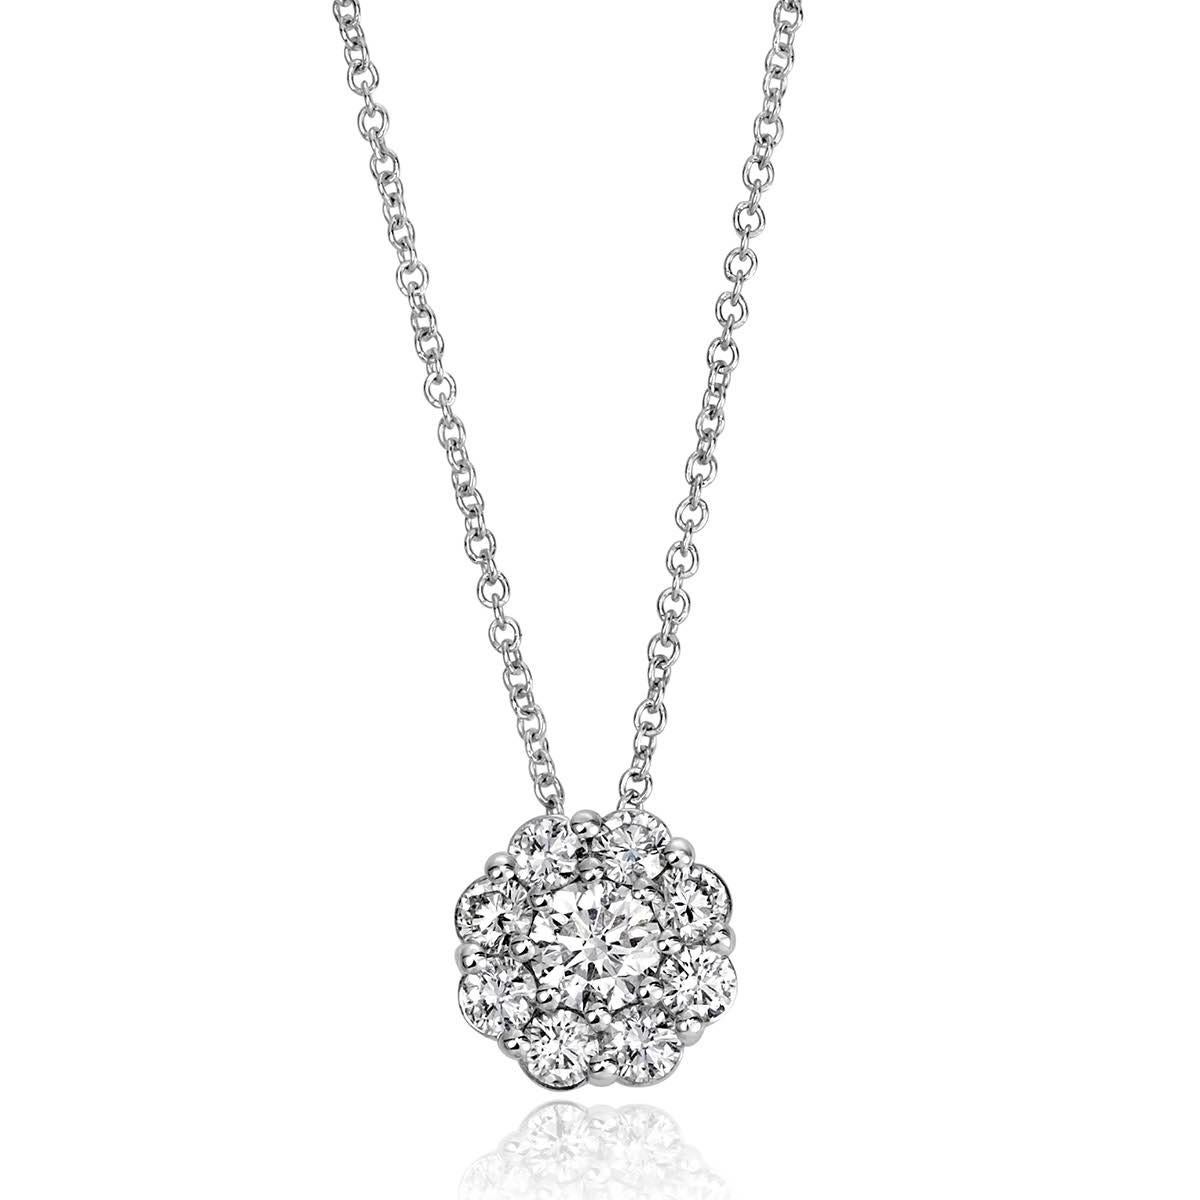 Handcrafted in 14k white gold, this lovely diamond pendant features 0.82ct of round brilliant cut diamonds set in an exquisite floral pattern. The diamonds are graded at E-F in color and VS1-VS2 in clarity. 
